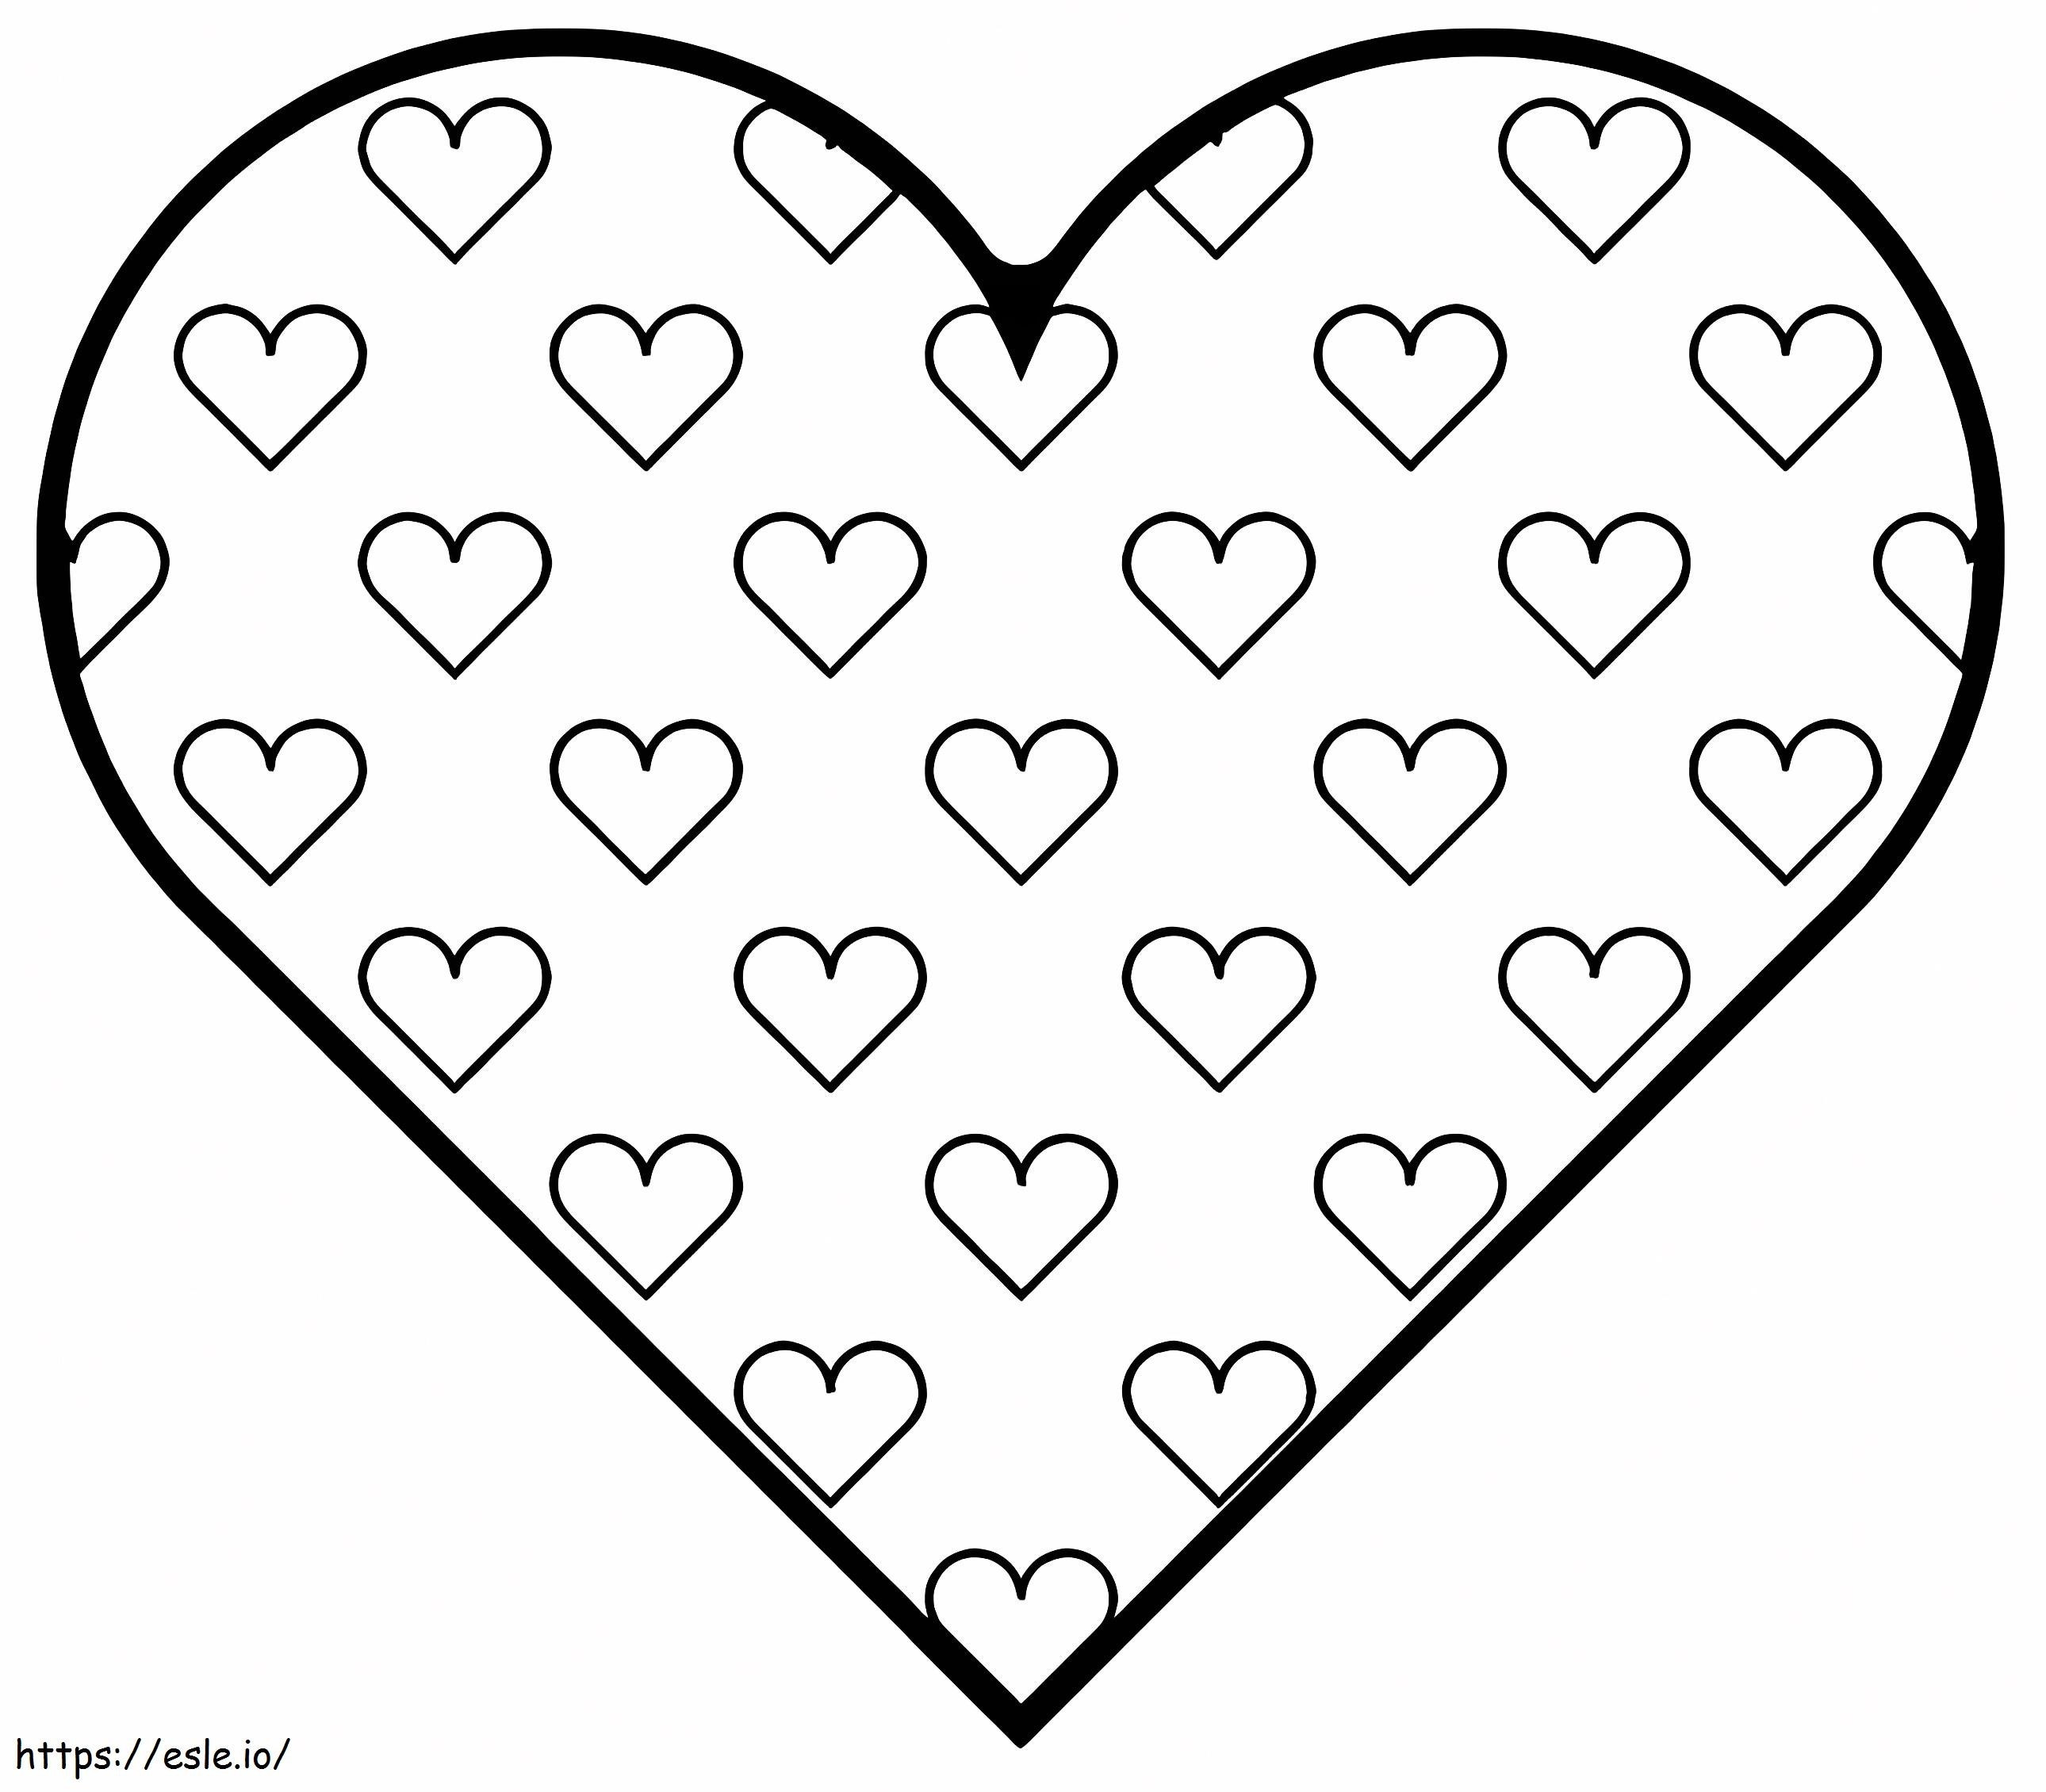 Hearts In Heart coloring page